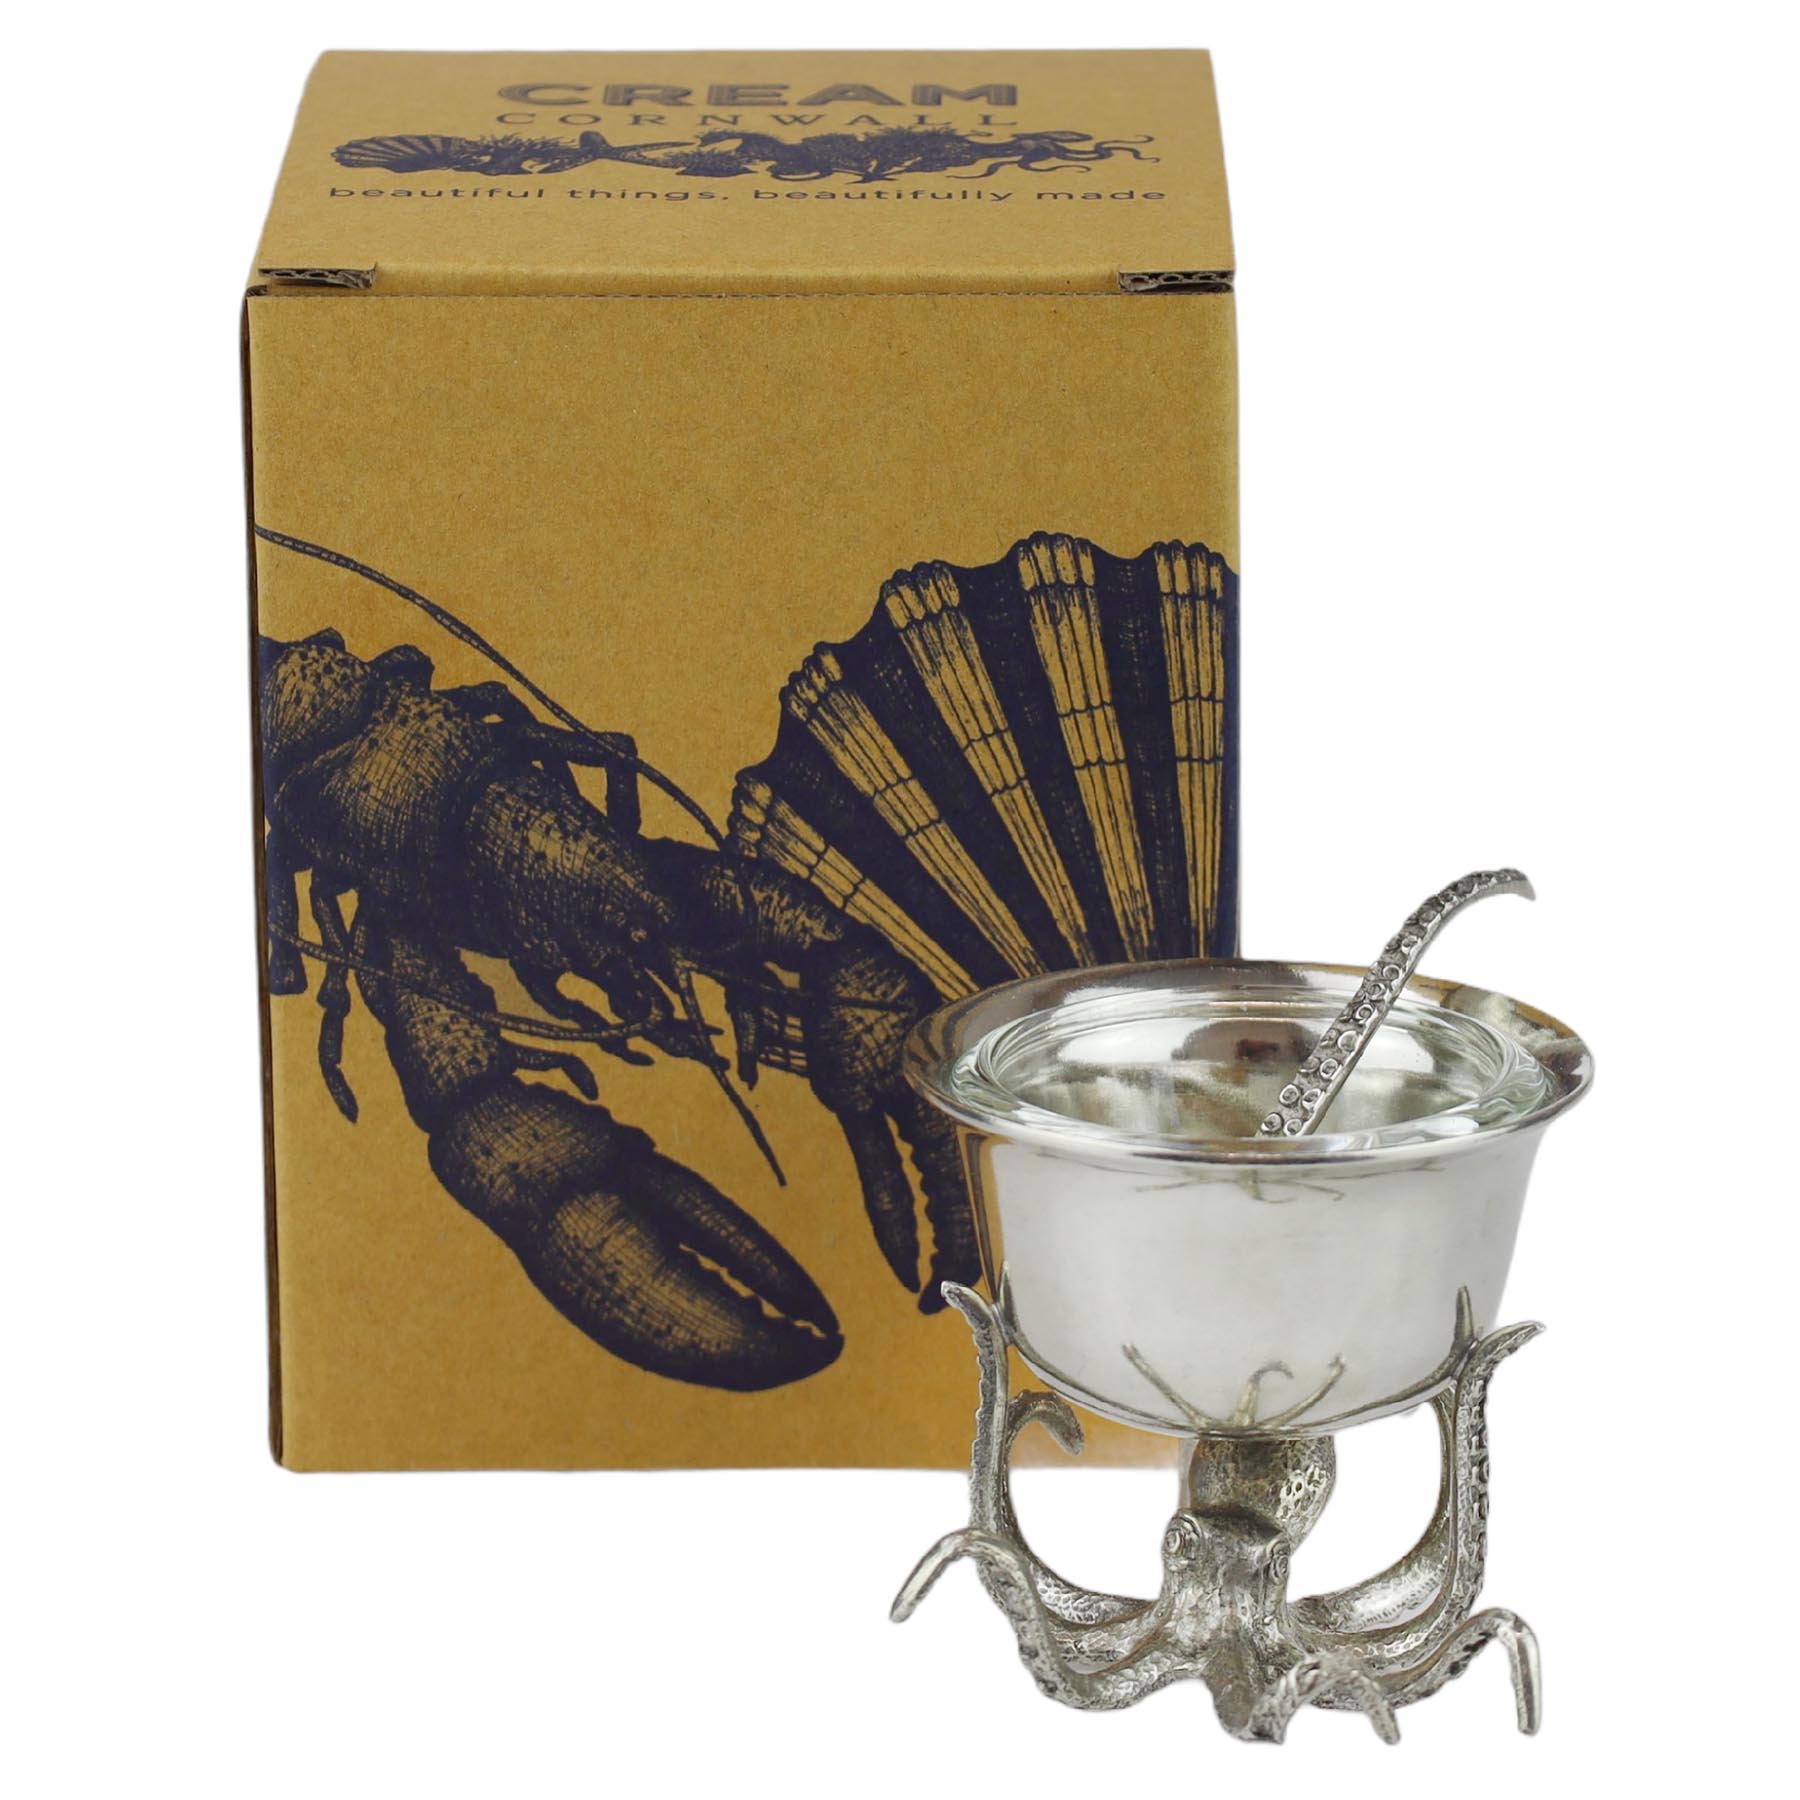 Pewter Octopus Condiment Bowl With Spoon in front of product box